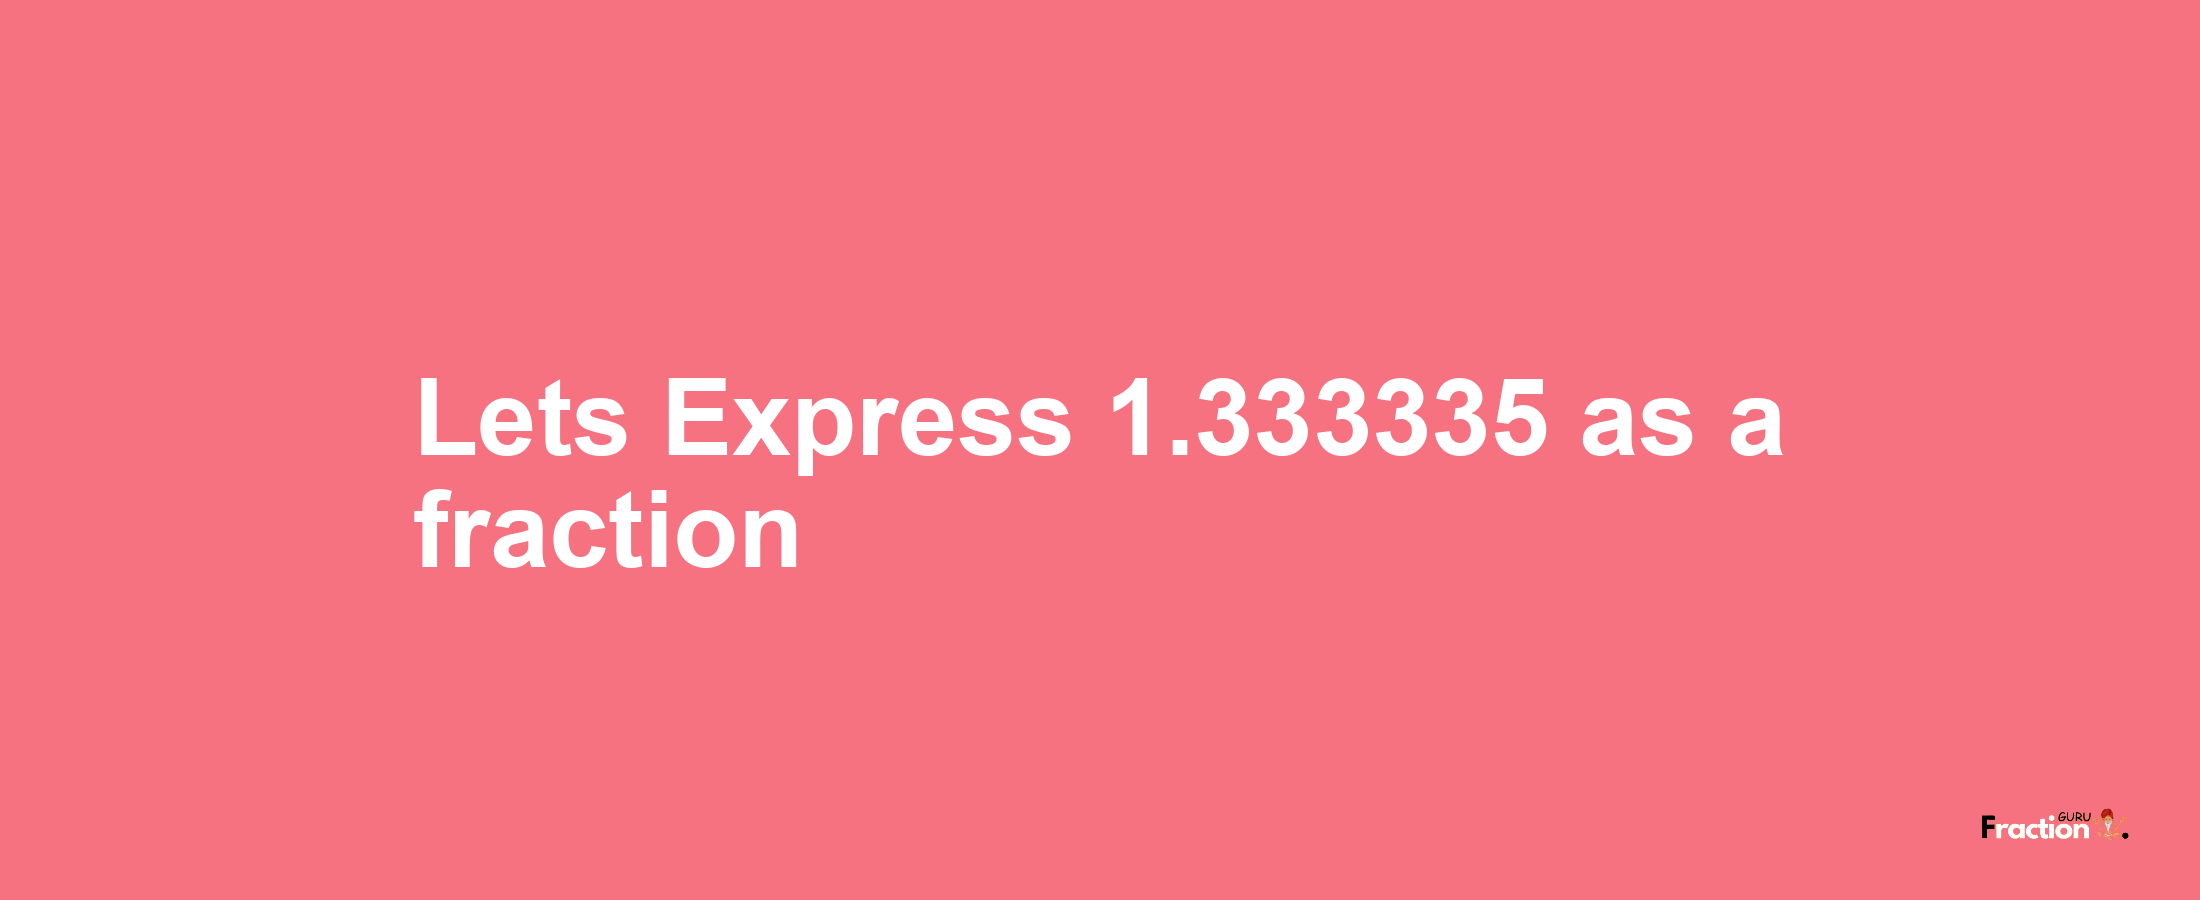 Lets Express 1.333335 as afraction